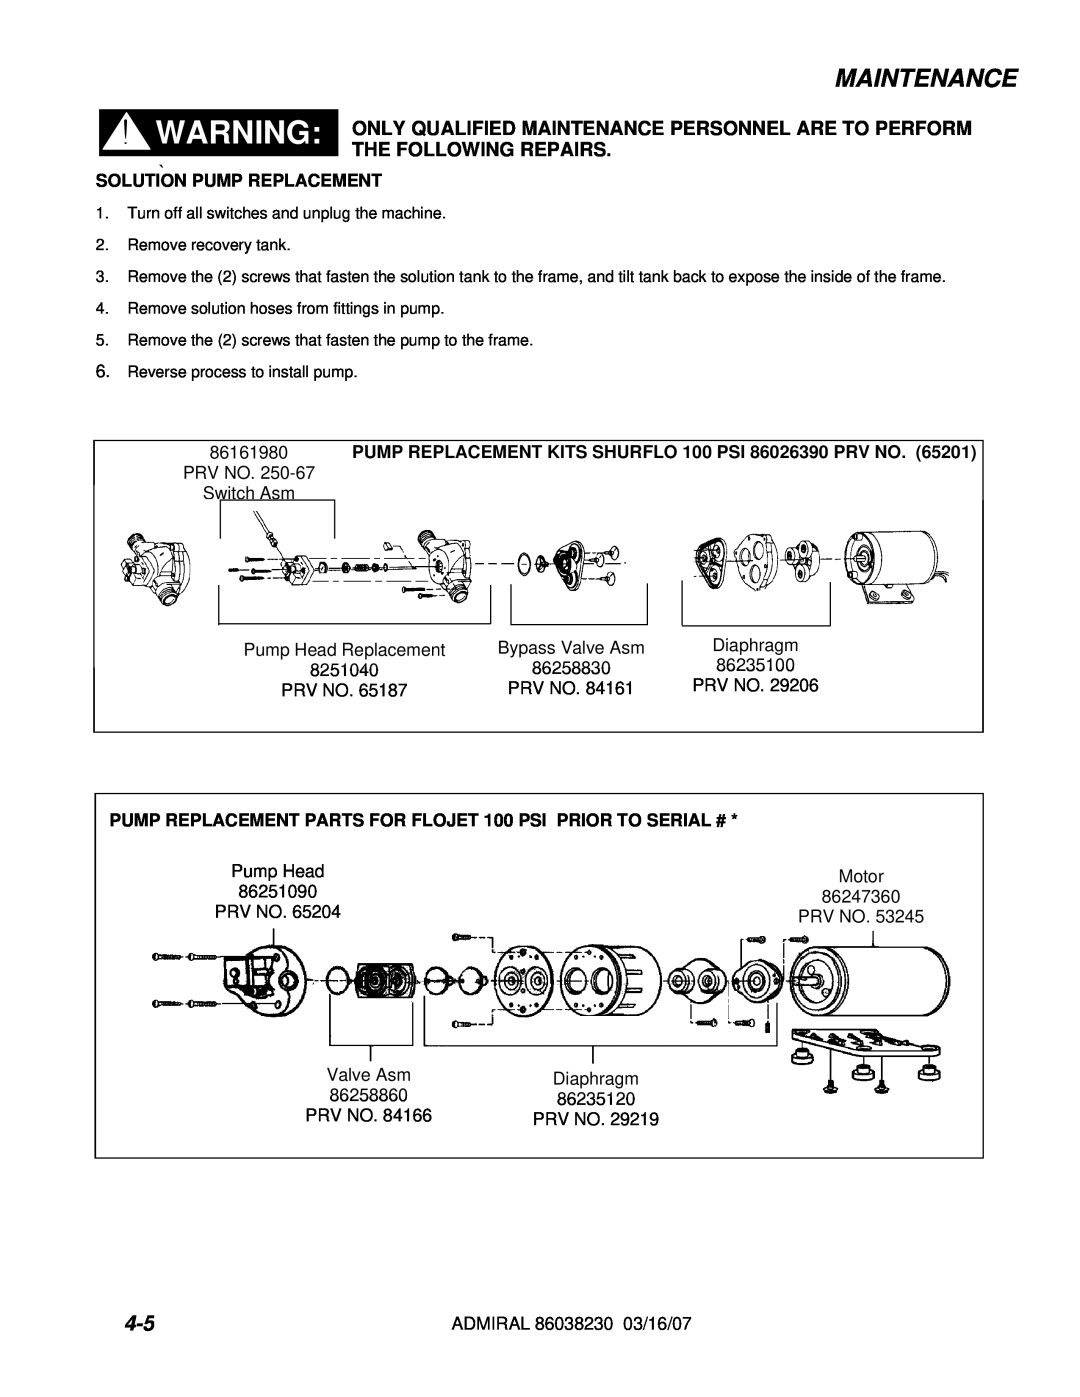 Windsor ADM8, 10080170 operating instructions Maintenance, Solution Pump Replacement 